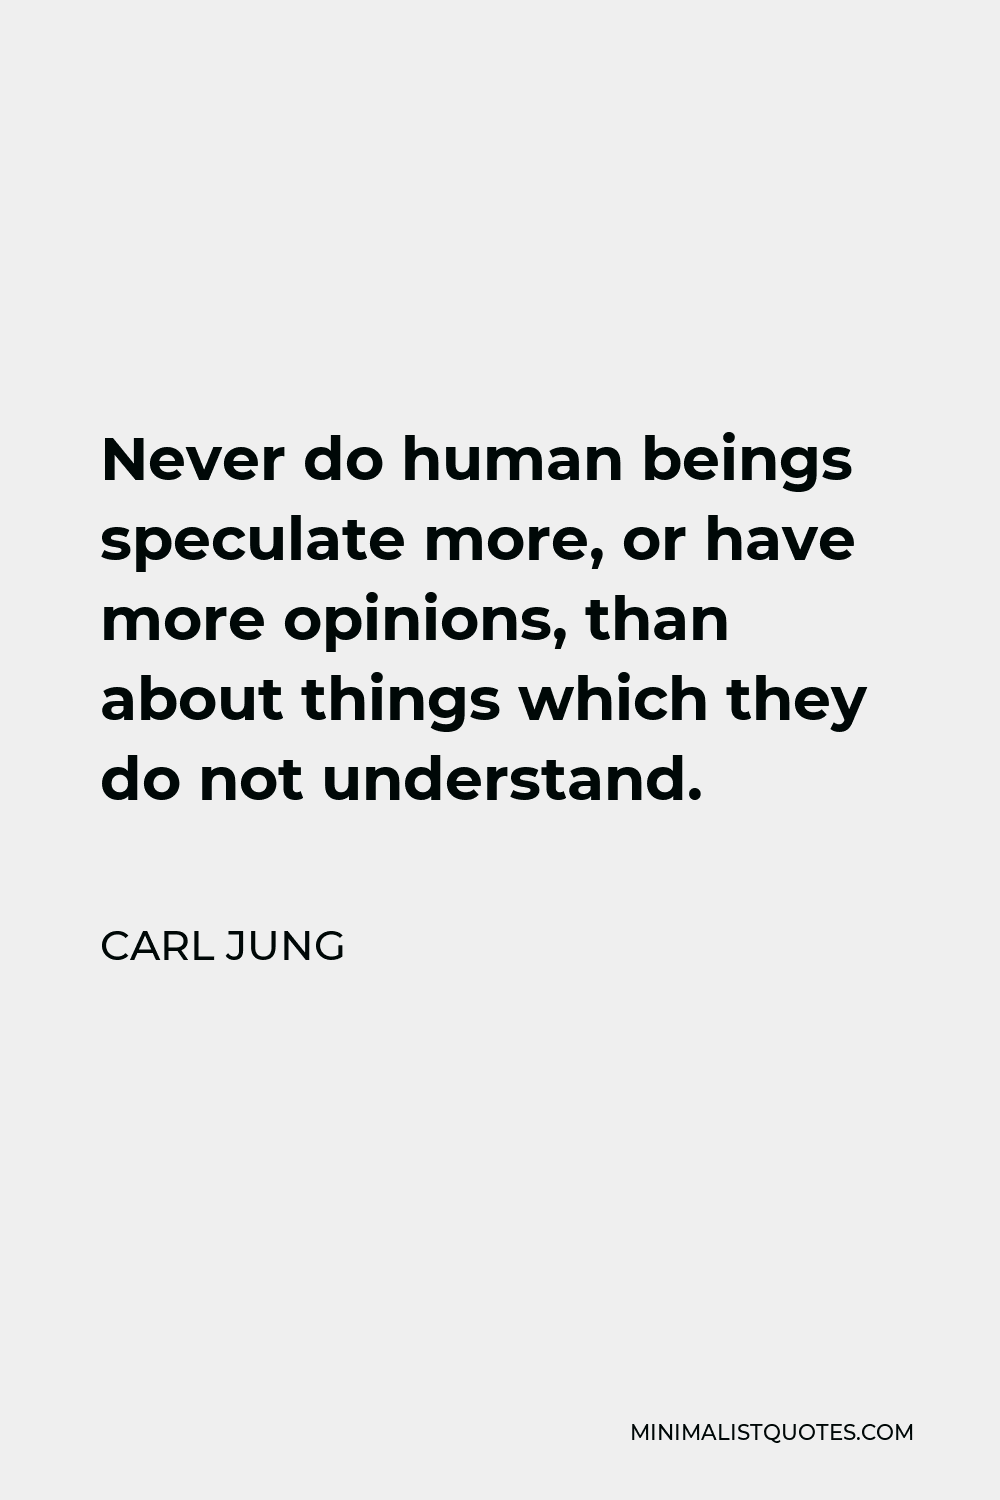 Carl Jung Quote - Never do human beings speculate more, or have more opinions, than about things which they do not understand.